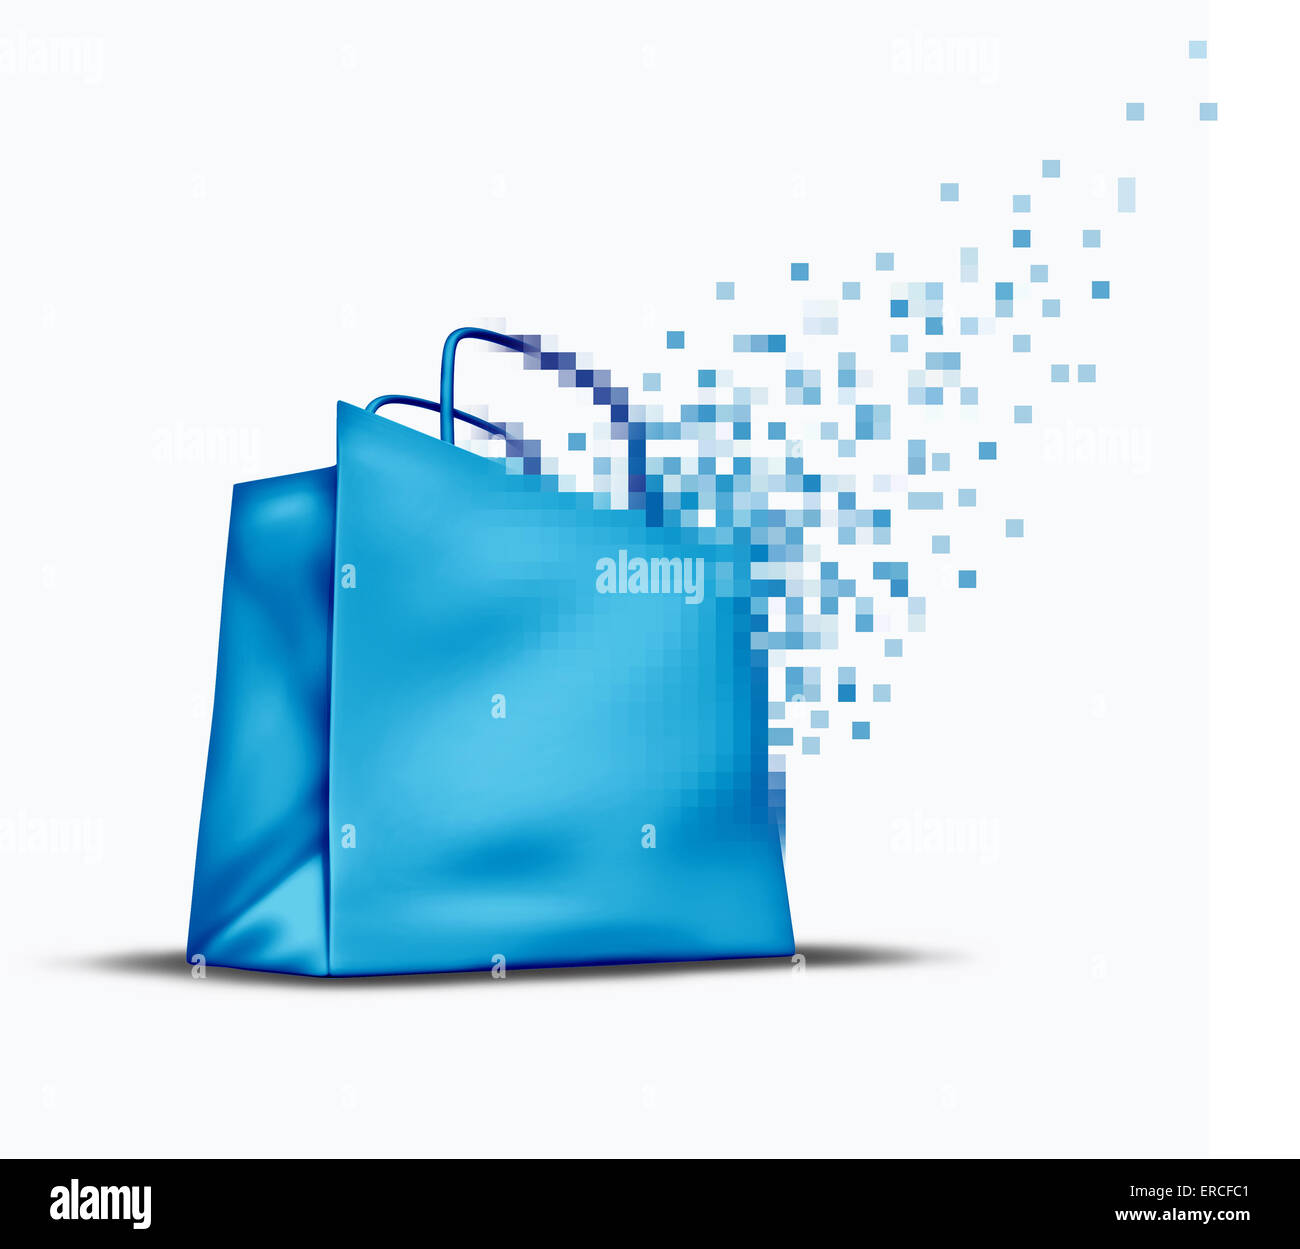 Online shopping and e-commerce concept as an internet store sale symbol with a shop bag that is transforming into digital pixels for web commerce in cyberspace. Stock Photo